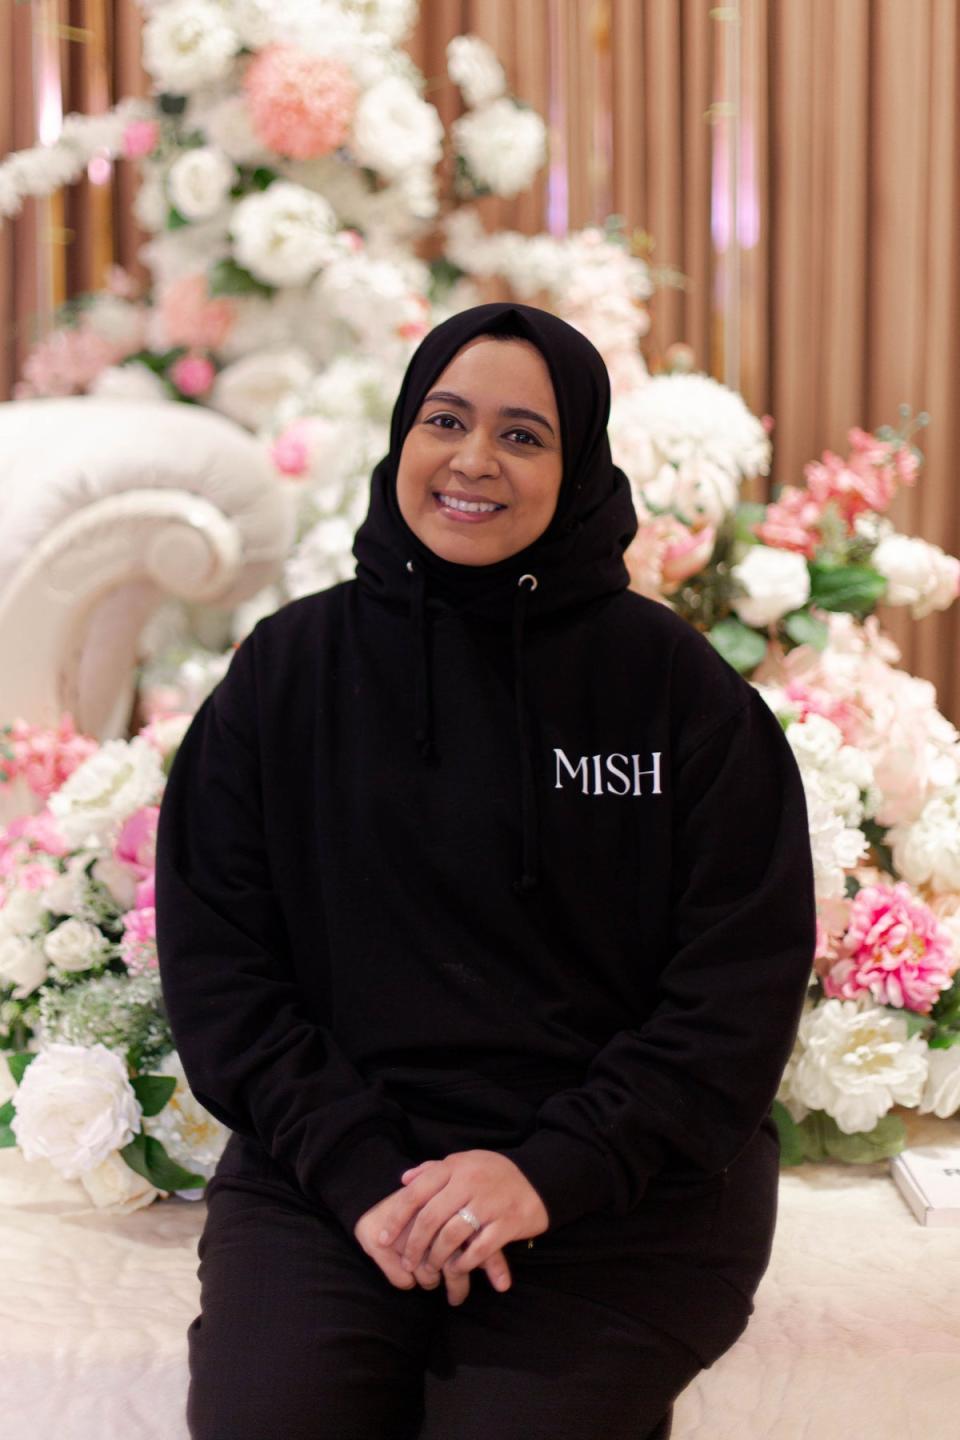 Mish Taznin, founder of Ramadan at Regency, reached out to Muslim women ‘alone in the city’ during the holy month (Aaliah Tailor)